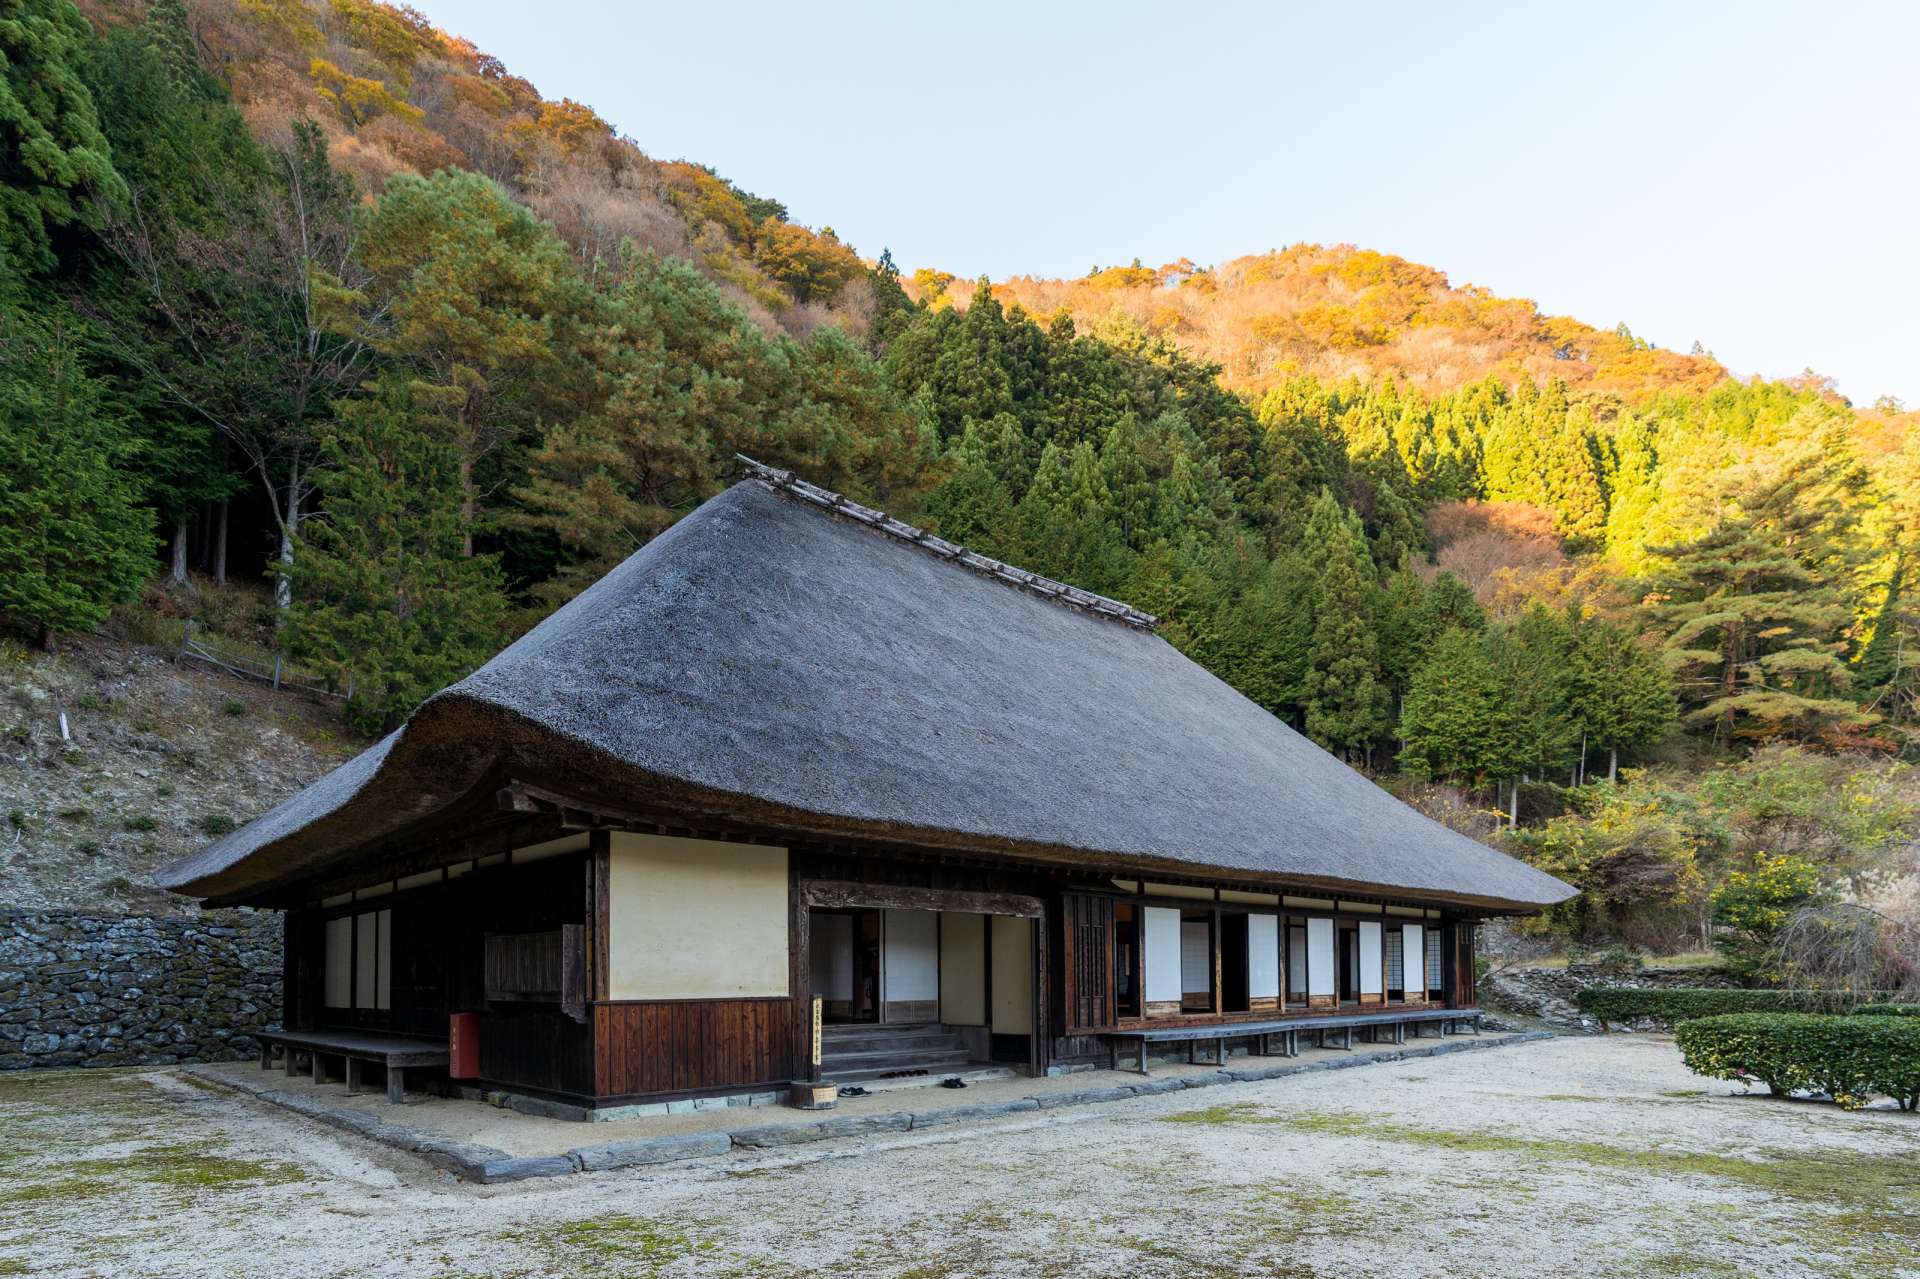 The former Kita family samurai folk residence. Topped with a thatched roof, its majestic form is sure to leave an impression.